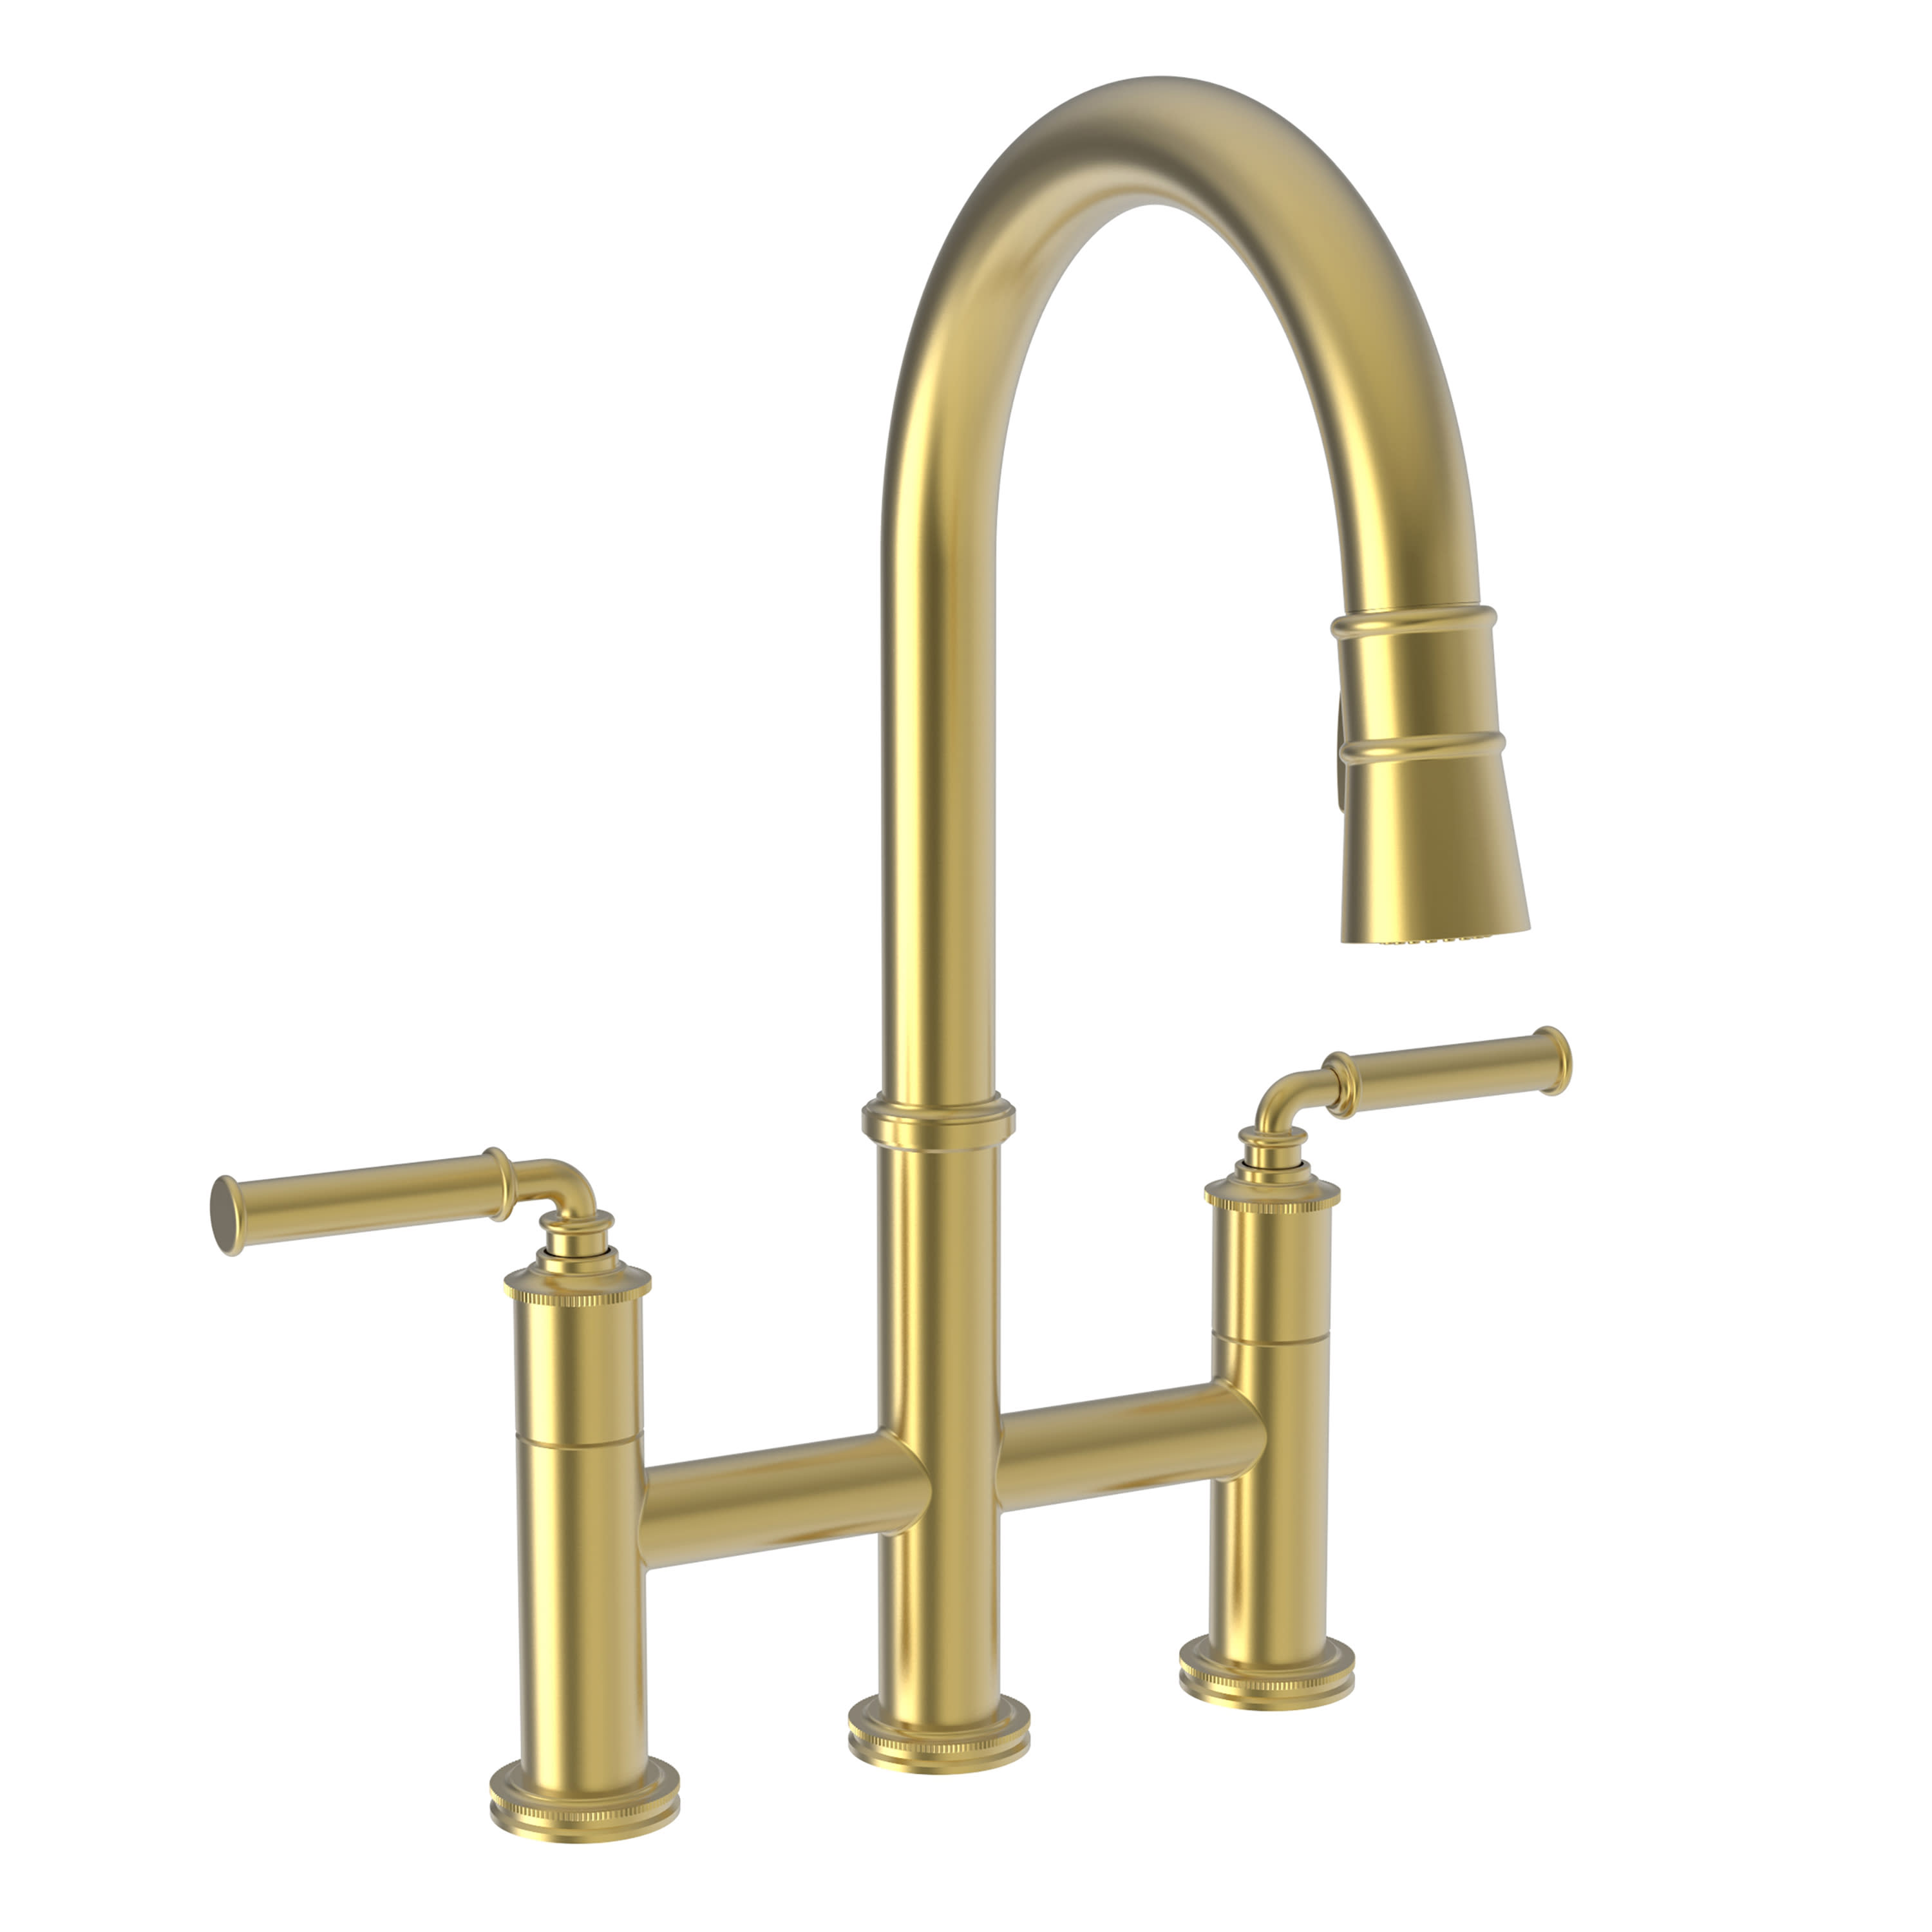 Taft Pull-down Kitchen Faucet